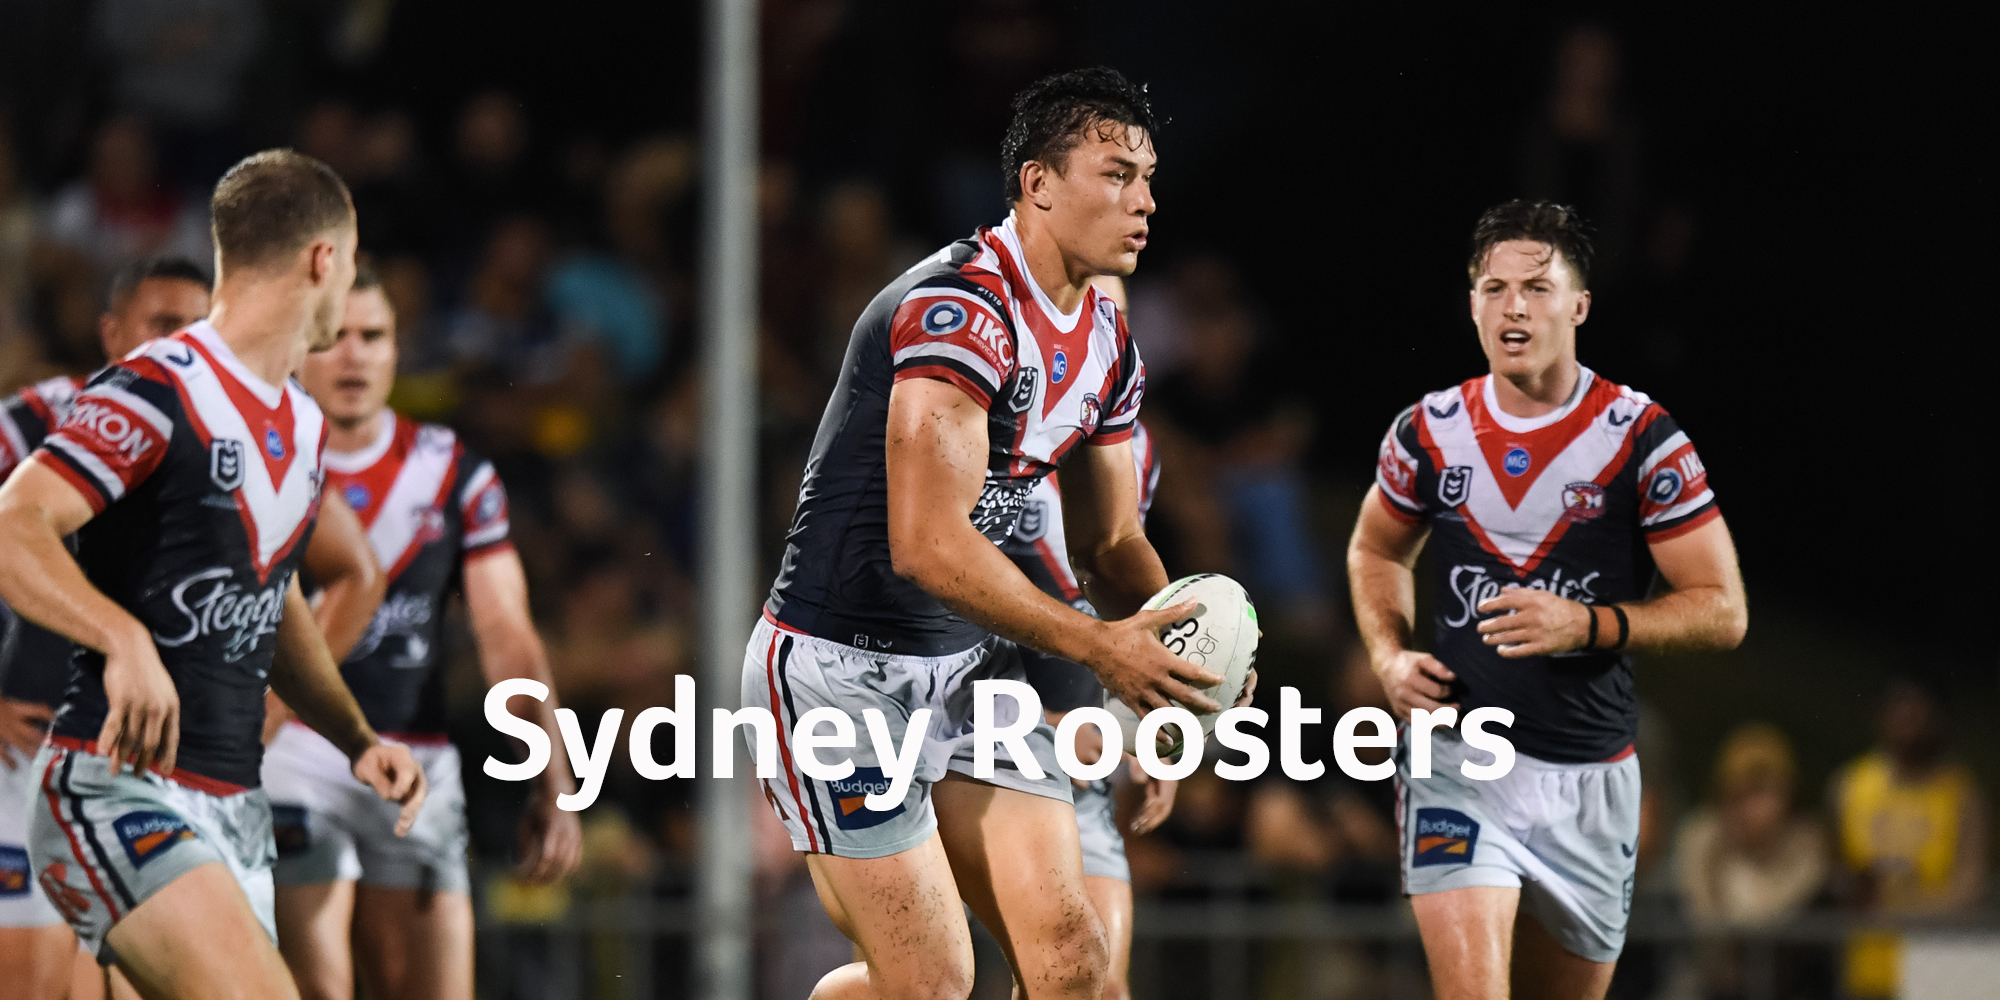 HR_sydney roosters